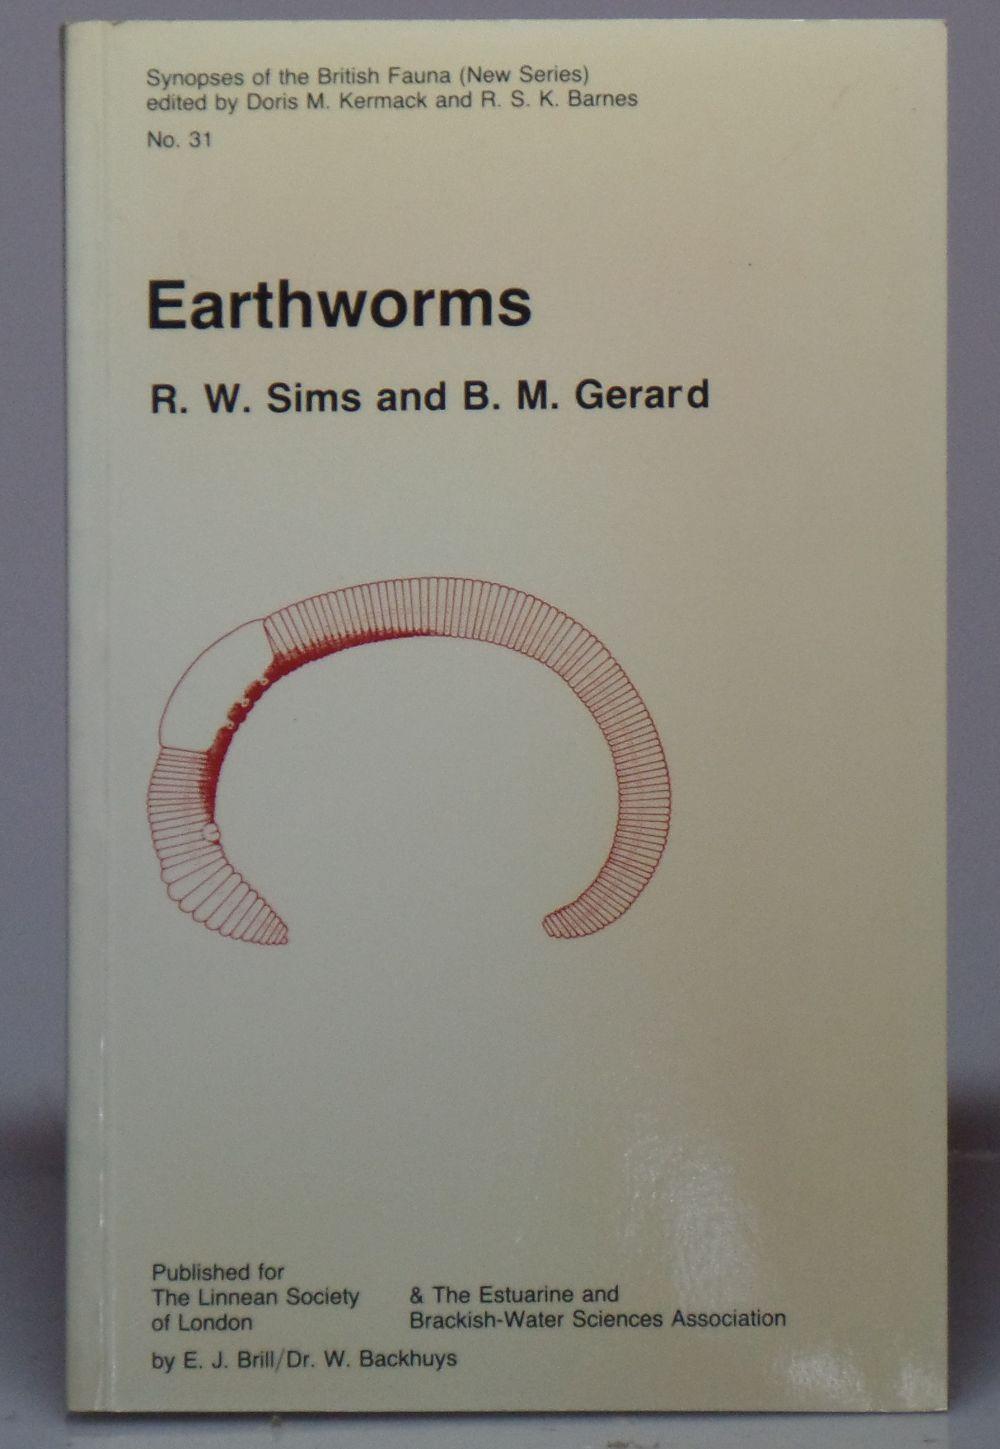 Earthworms: Keys and Notes for the Identification of the Species (Synopses of the British fauna) - Sims, R.W.; Gerard, B.M